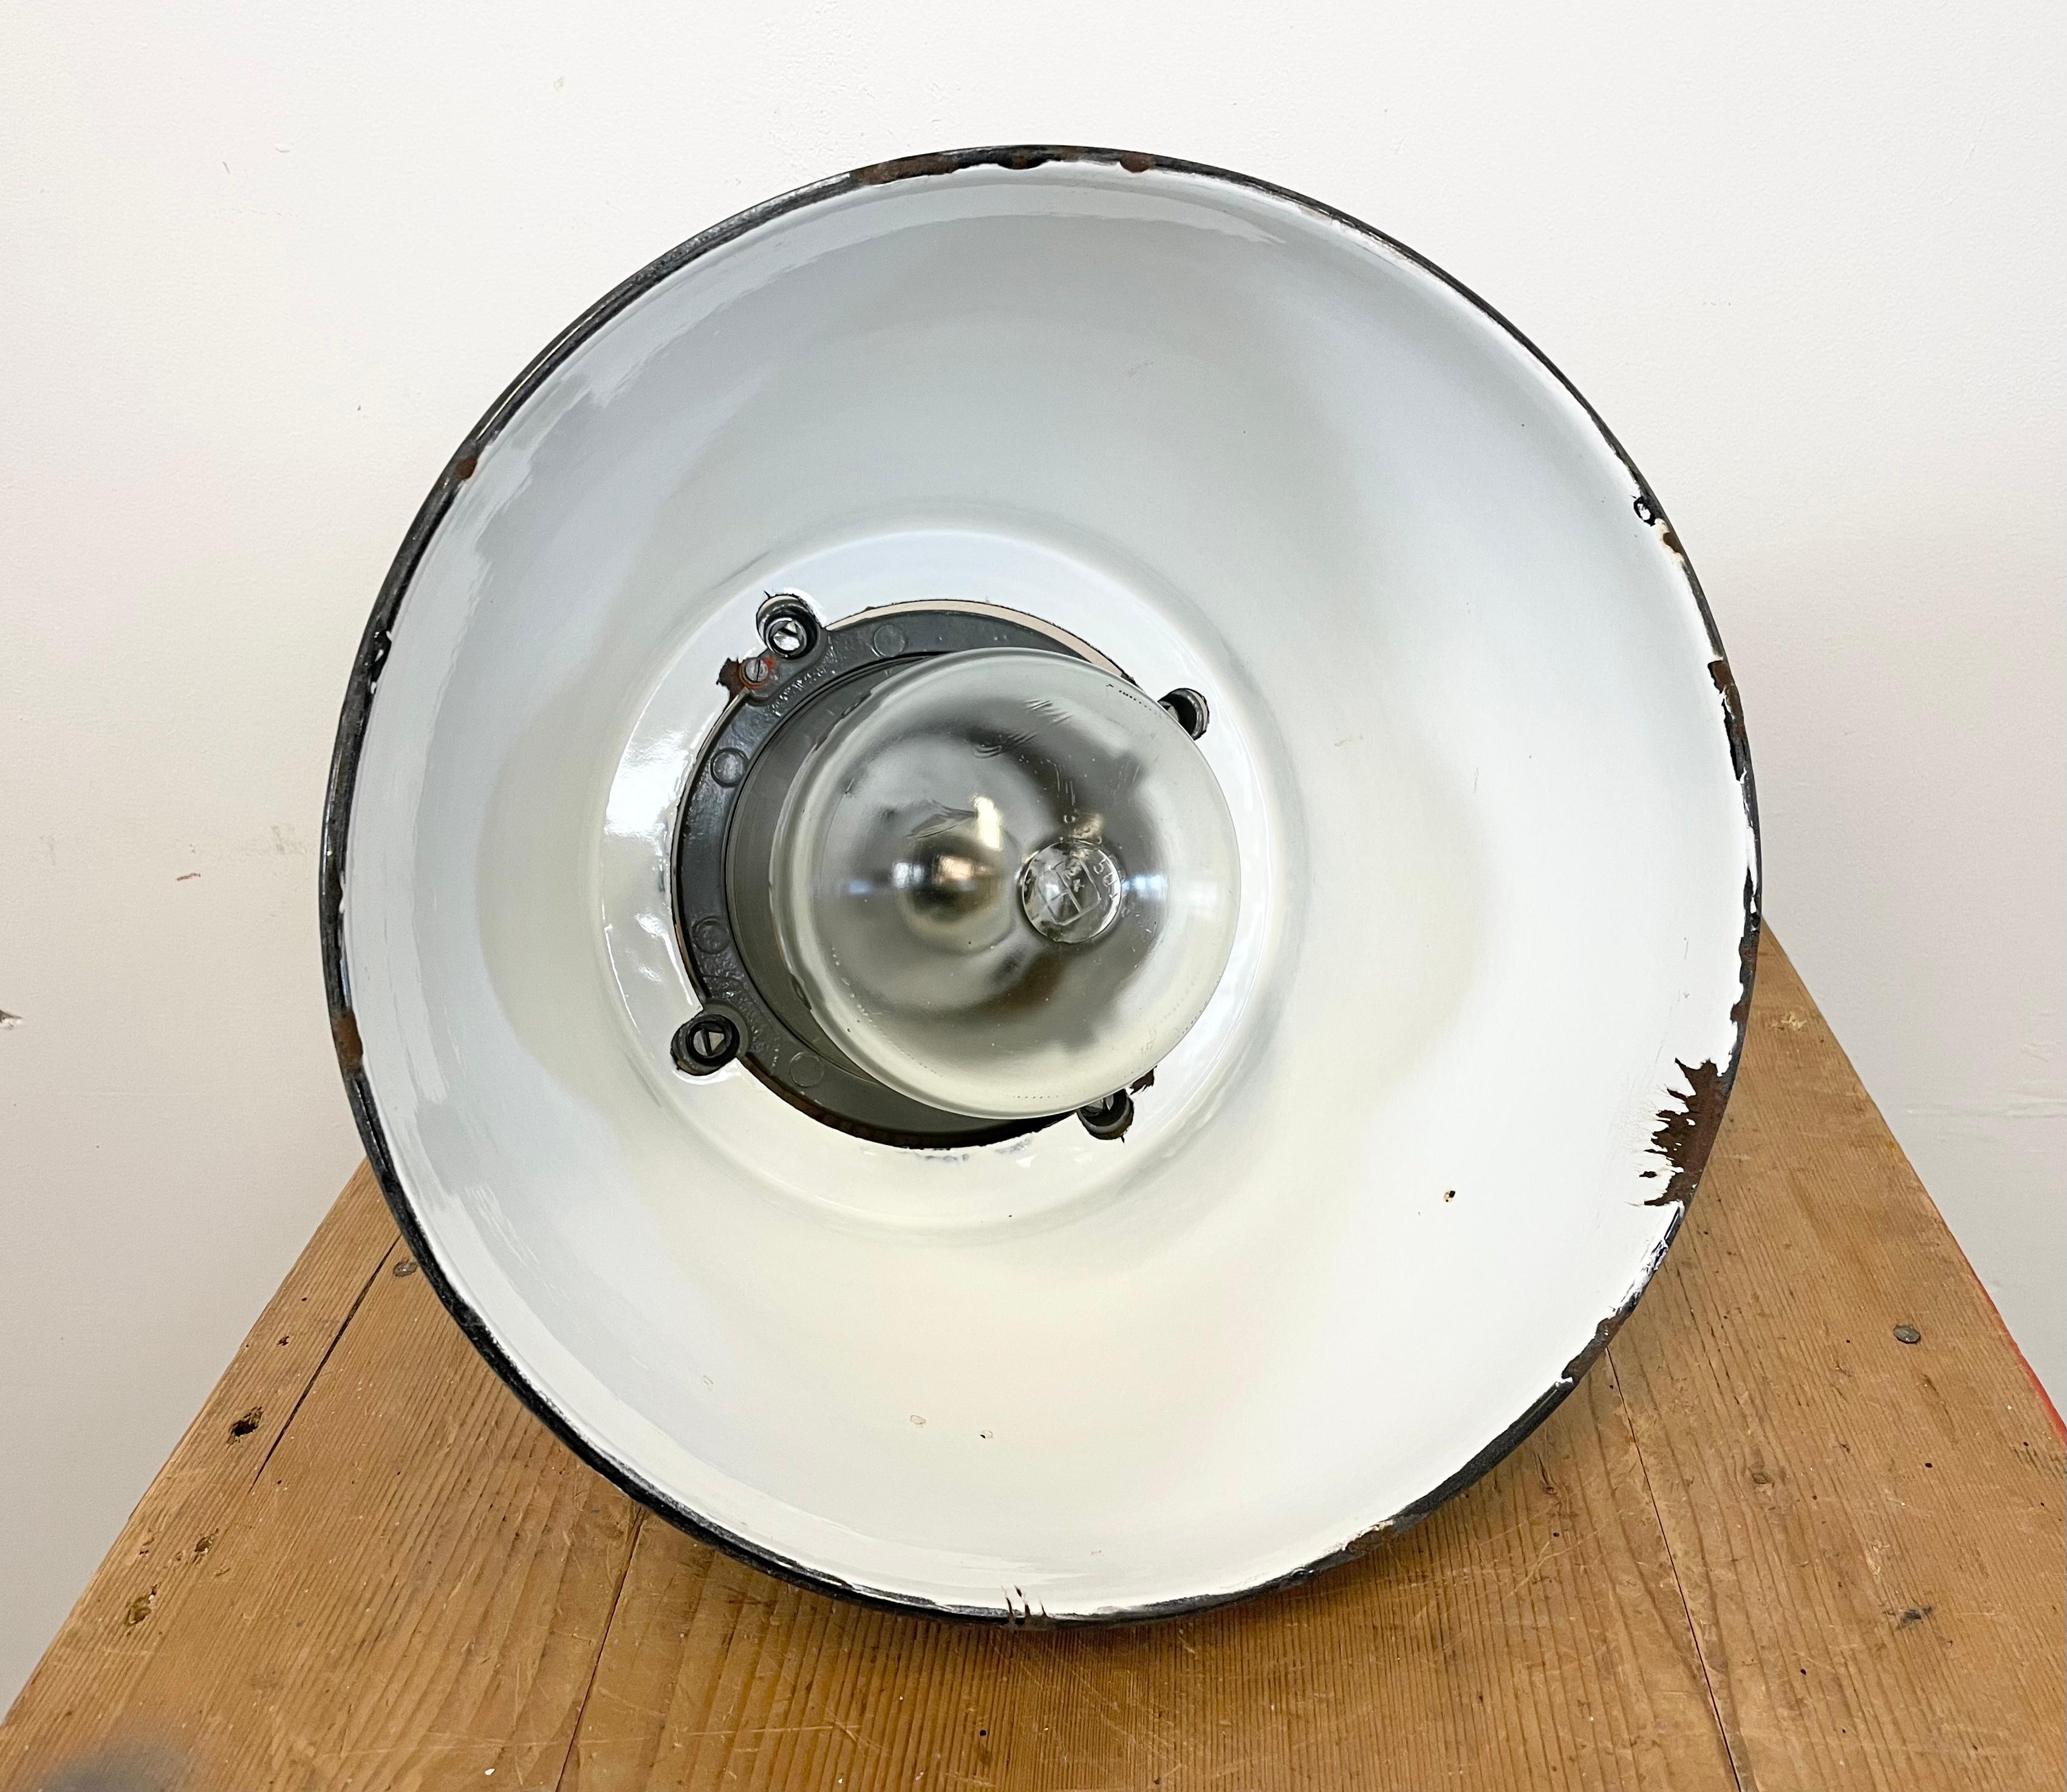 Dark Grey Explosion Proof Lamp with Black Enameled Shade, 1970s For Sale 8